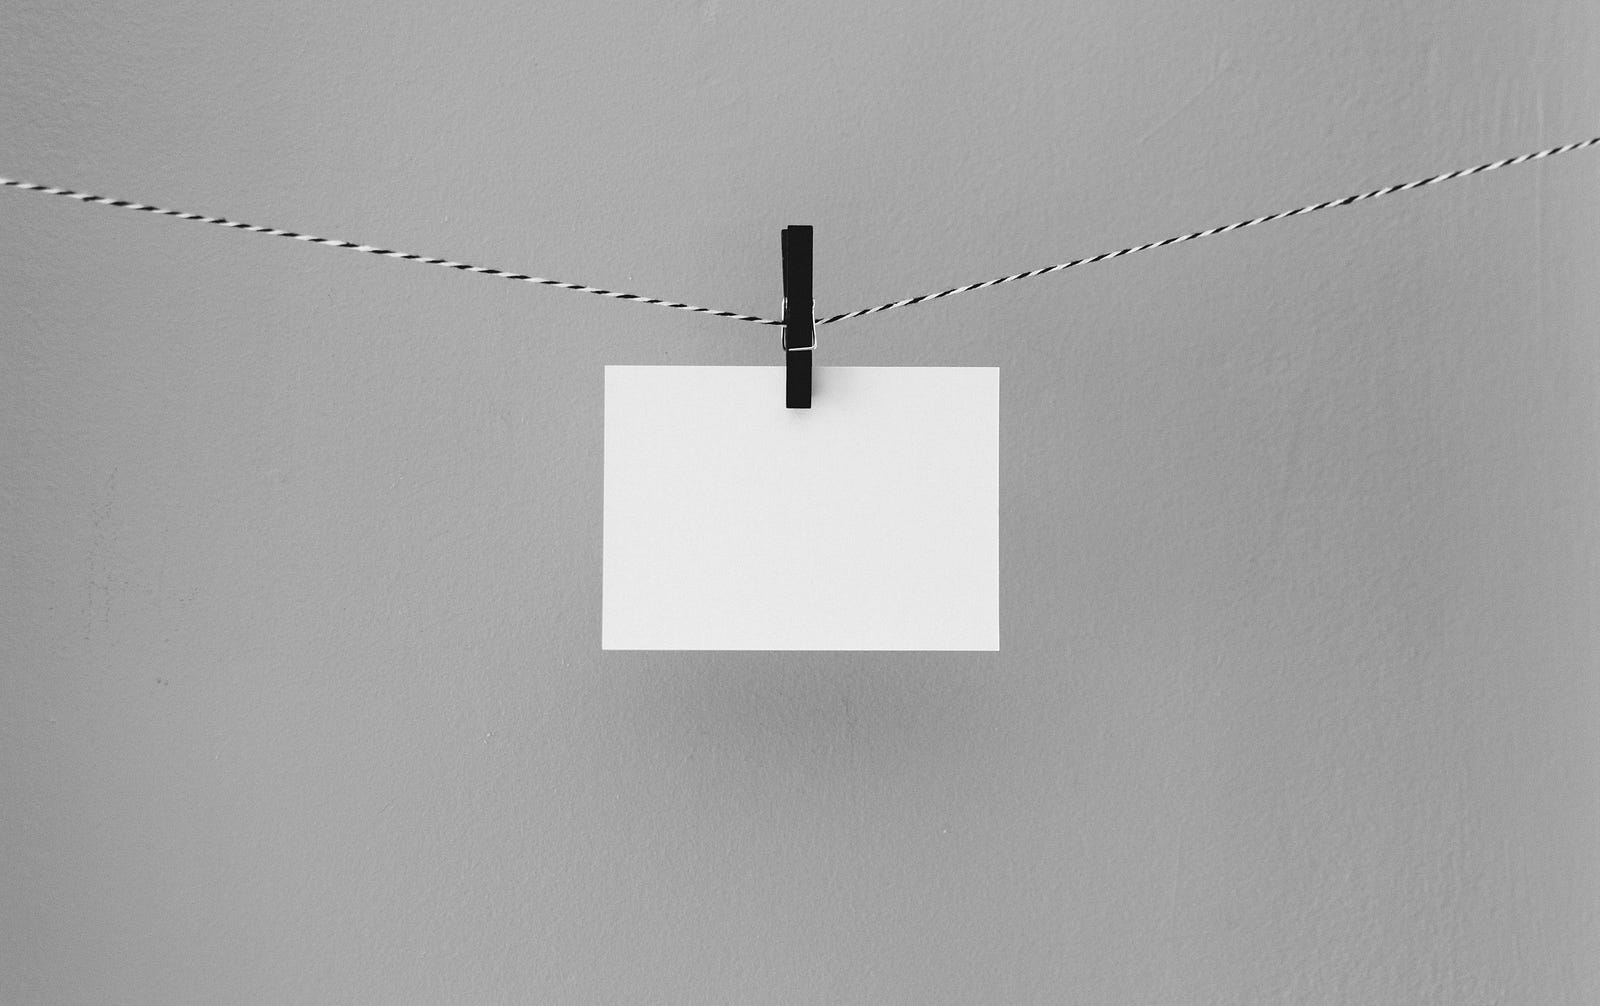 A blank small rectangular paper hangs by a clothespin from a string.